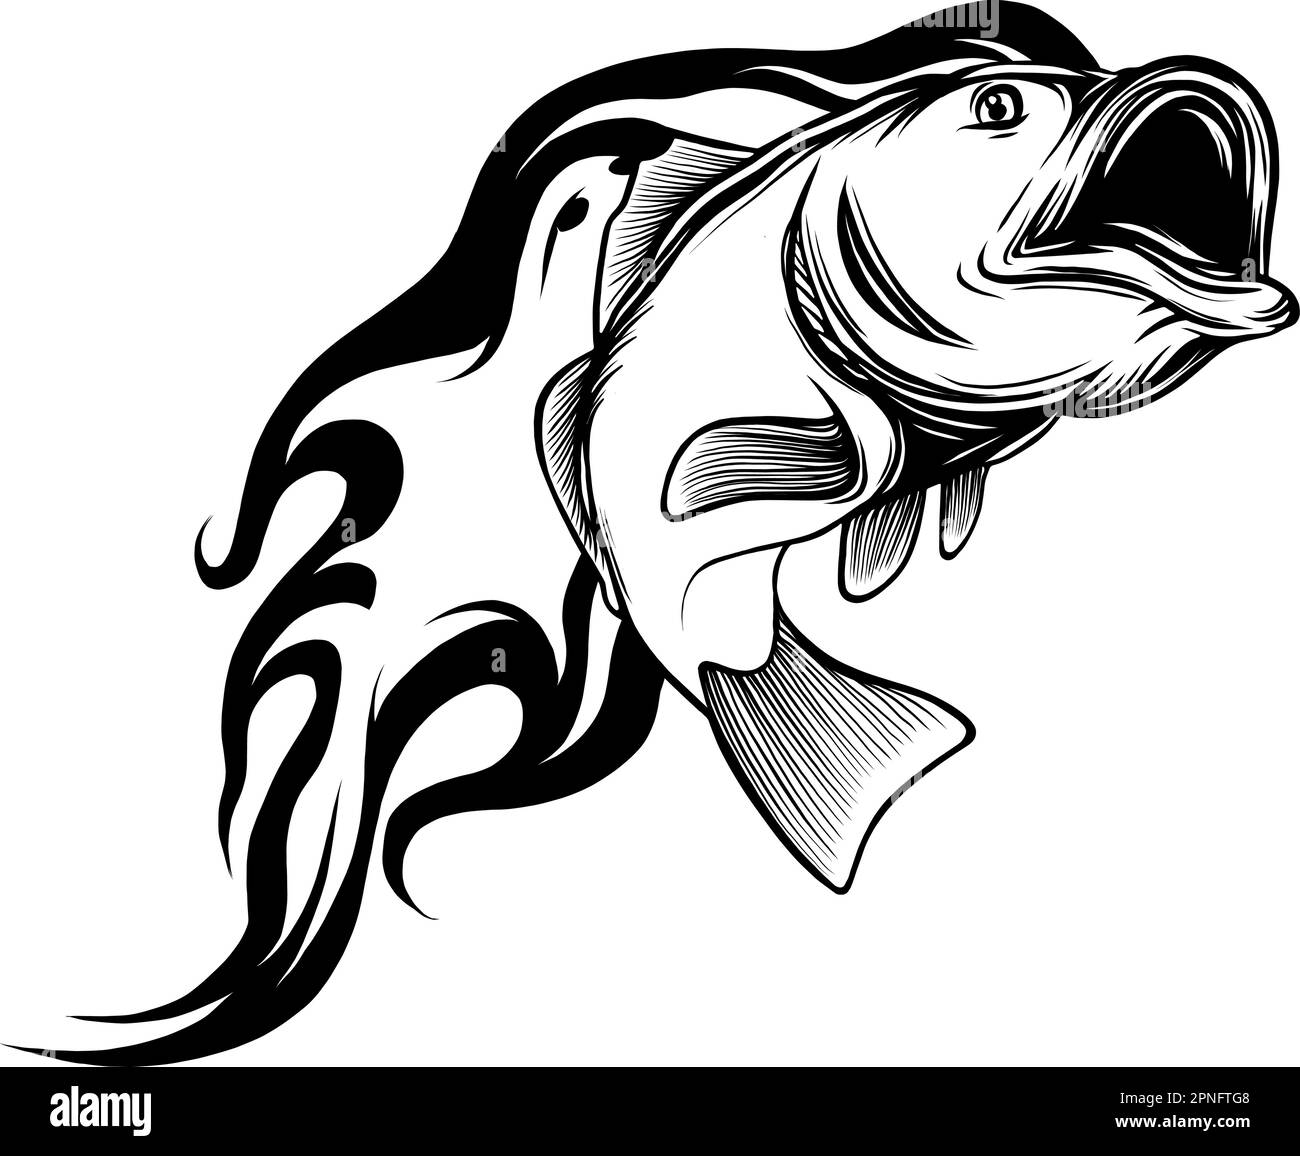 vector illustration of monochrome bass fish with flames Stock Vector